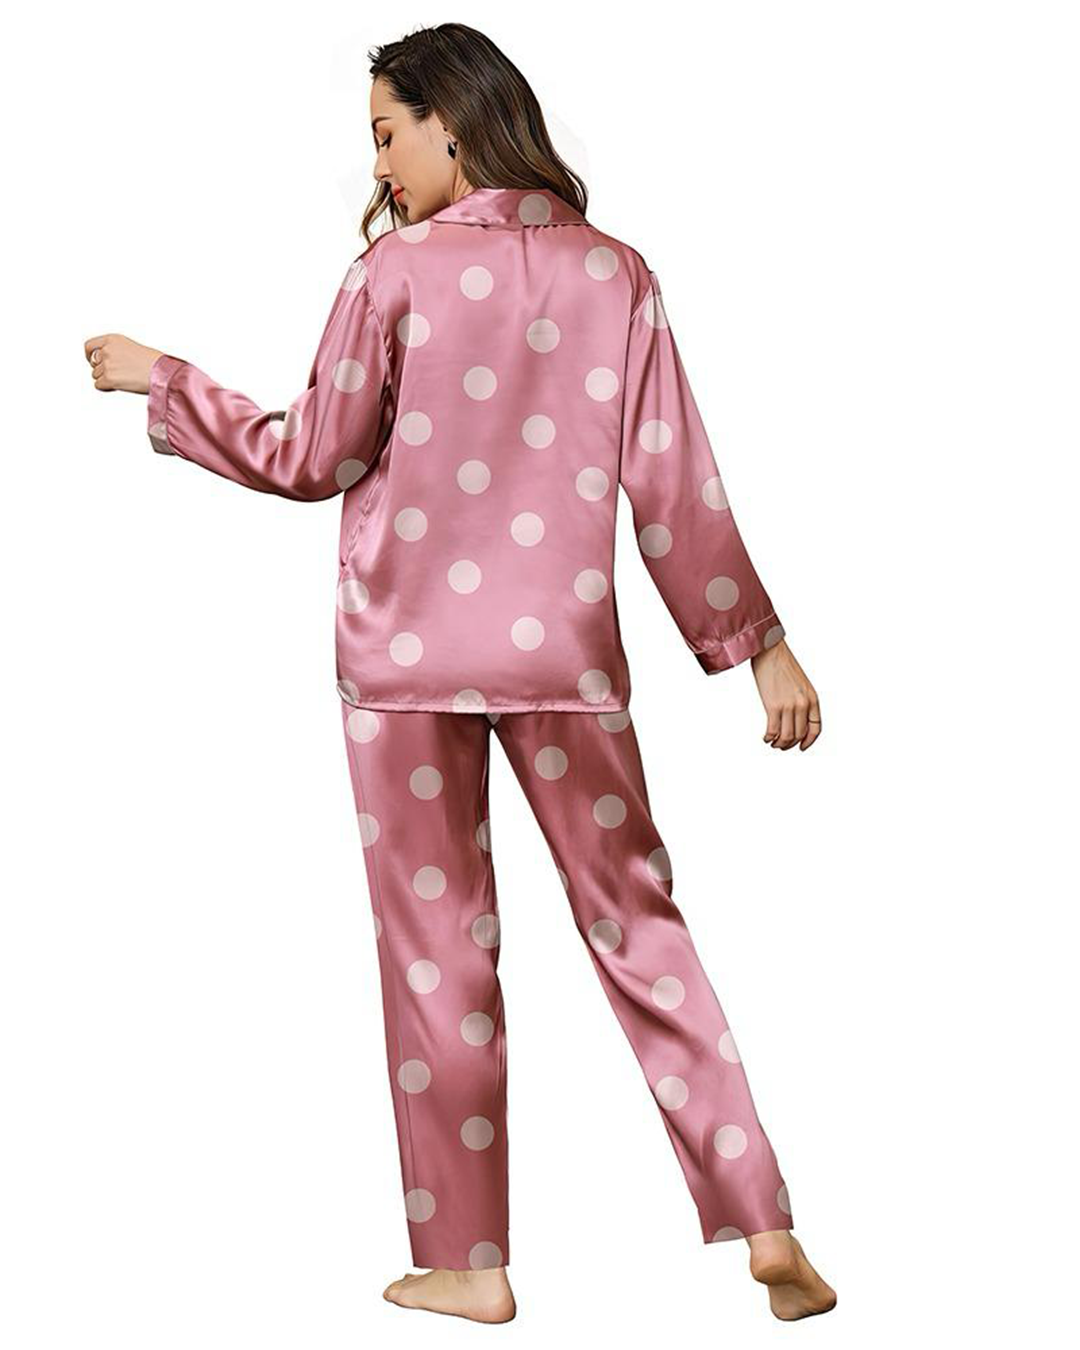 Women's pajamas with buttons by Stan Dwyer